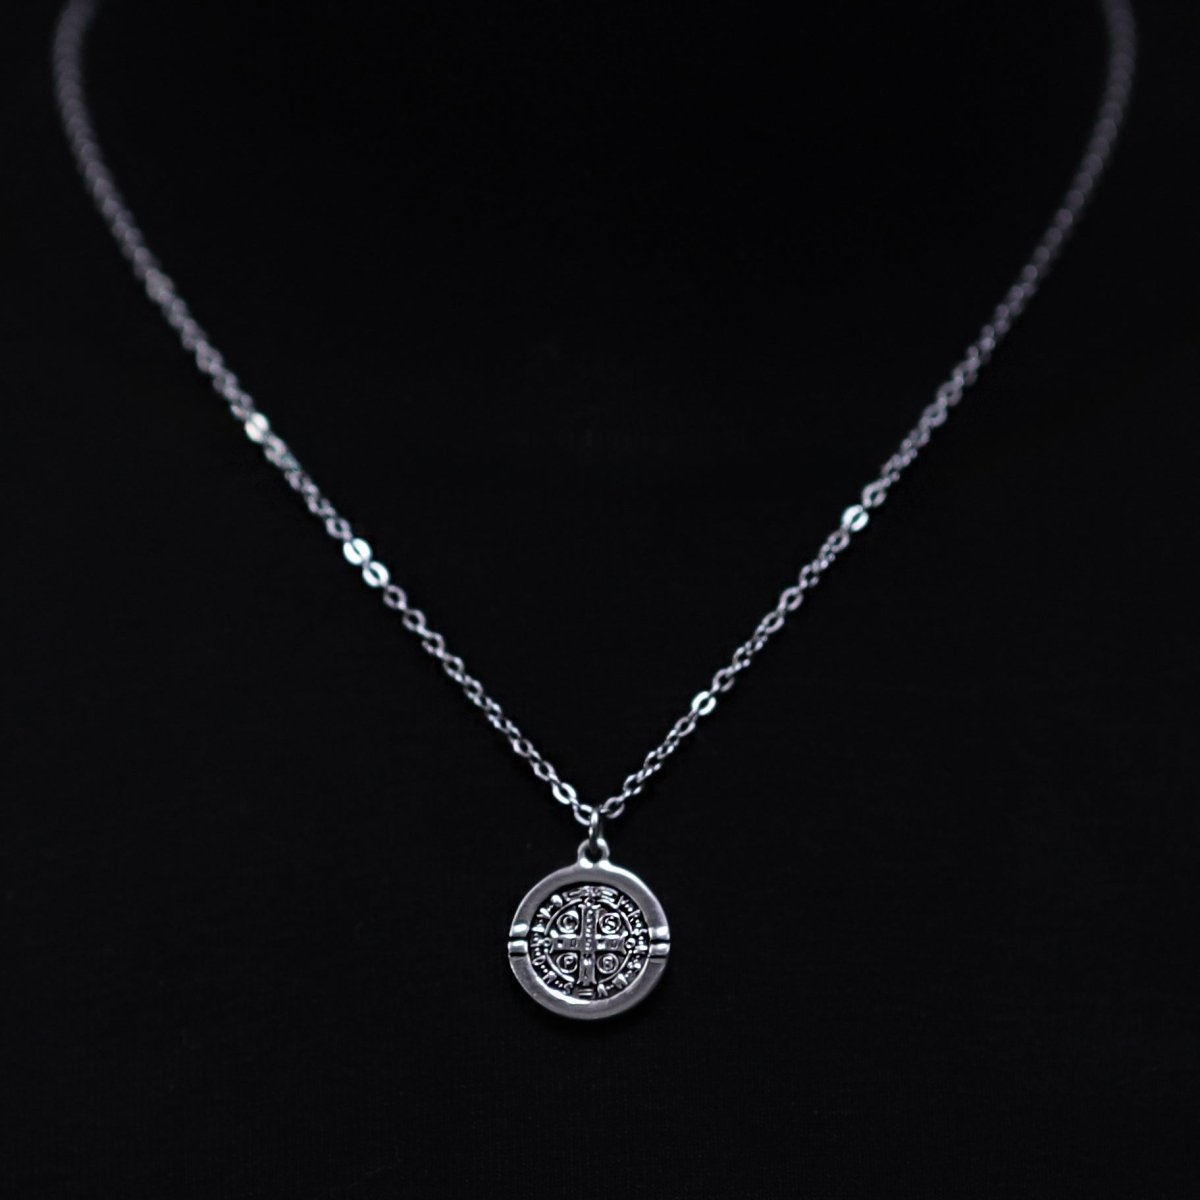 Erazino Stainless Steel Chain Necklace with St Benedict Medallion Pendant